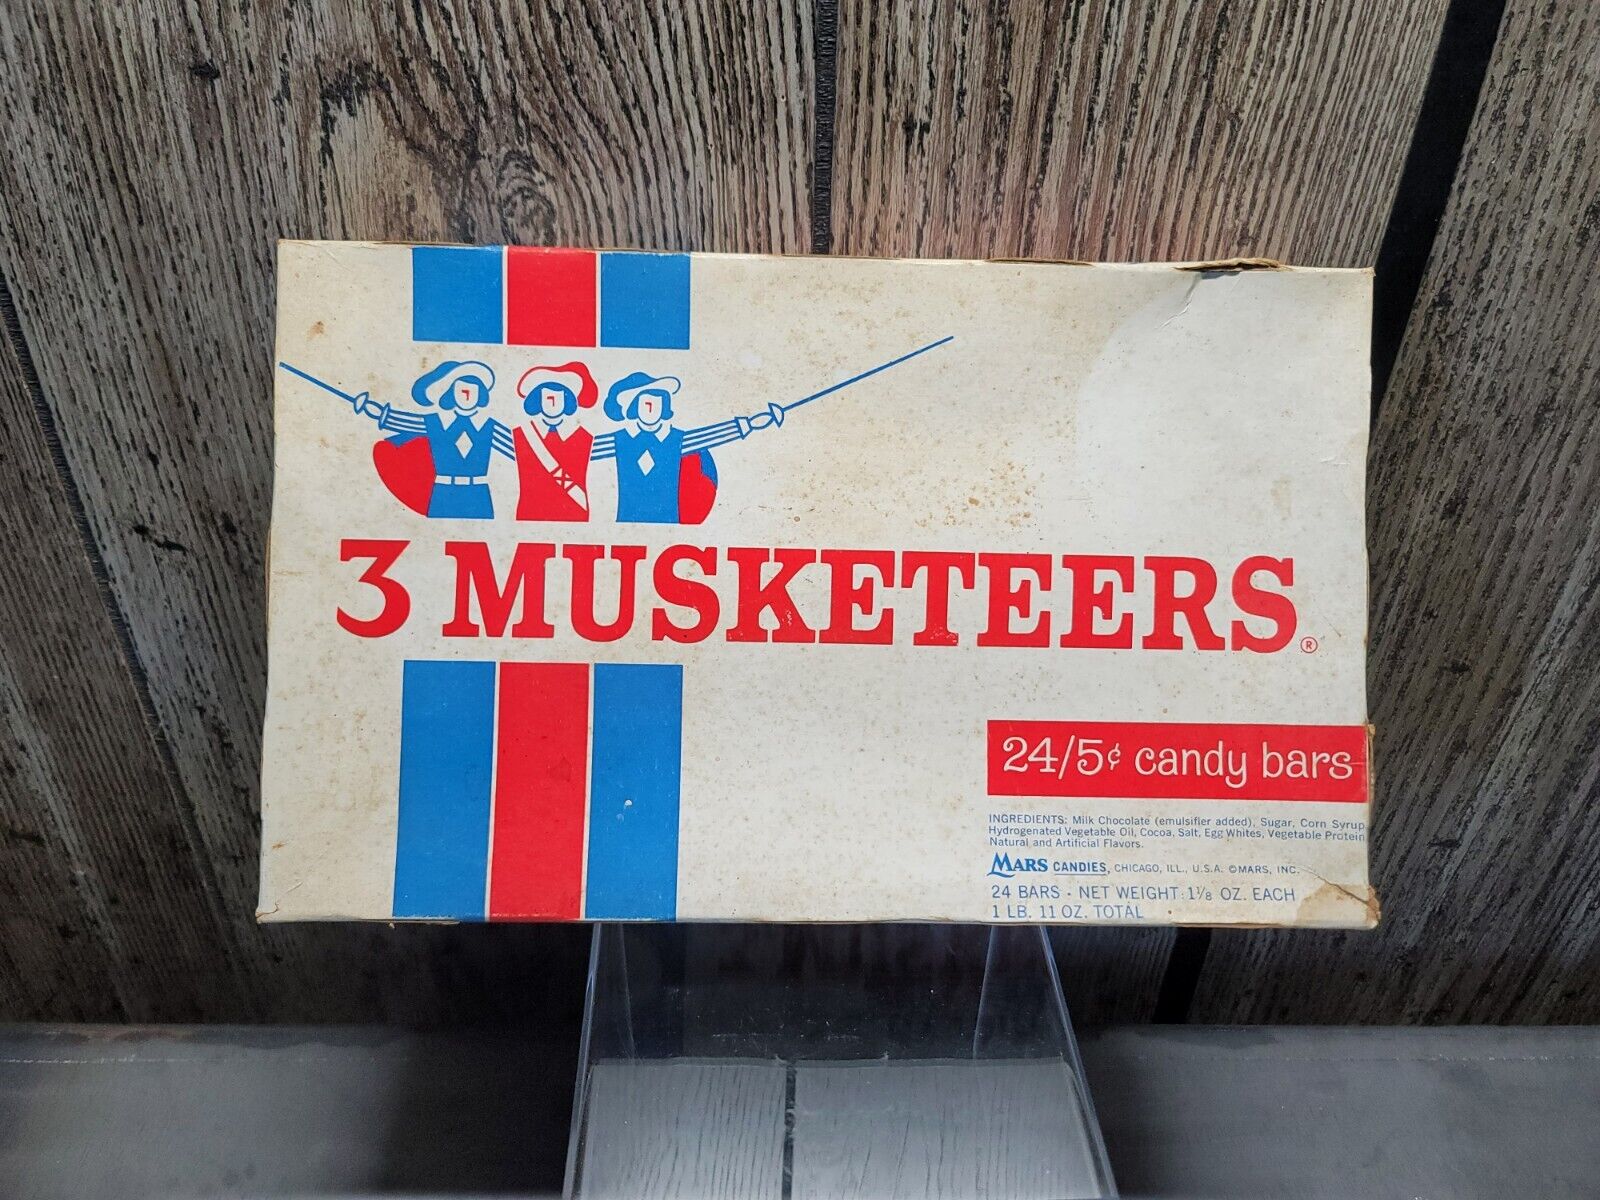 1955 3 Musketeers Candy Bar Box Vintage Candy Advertising Box